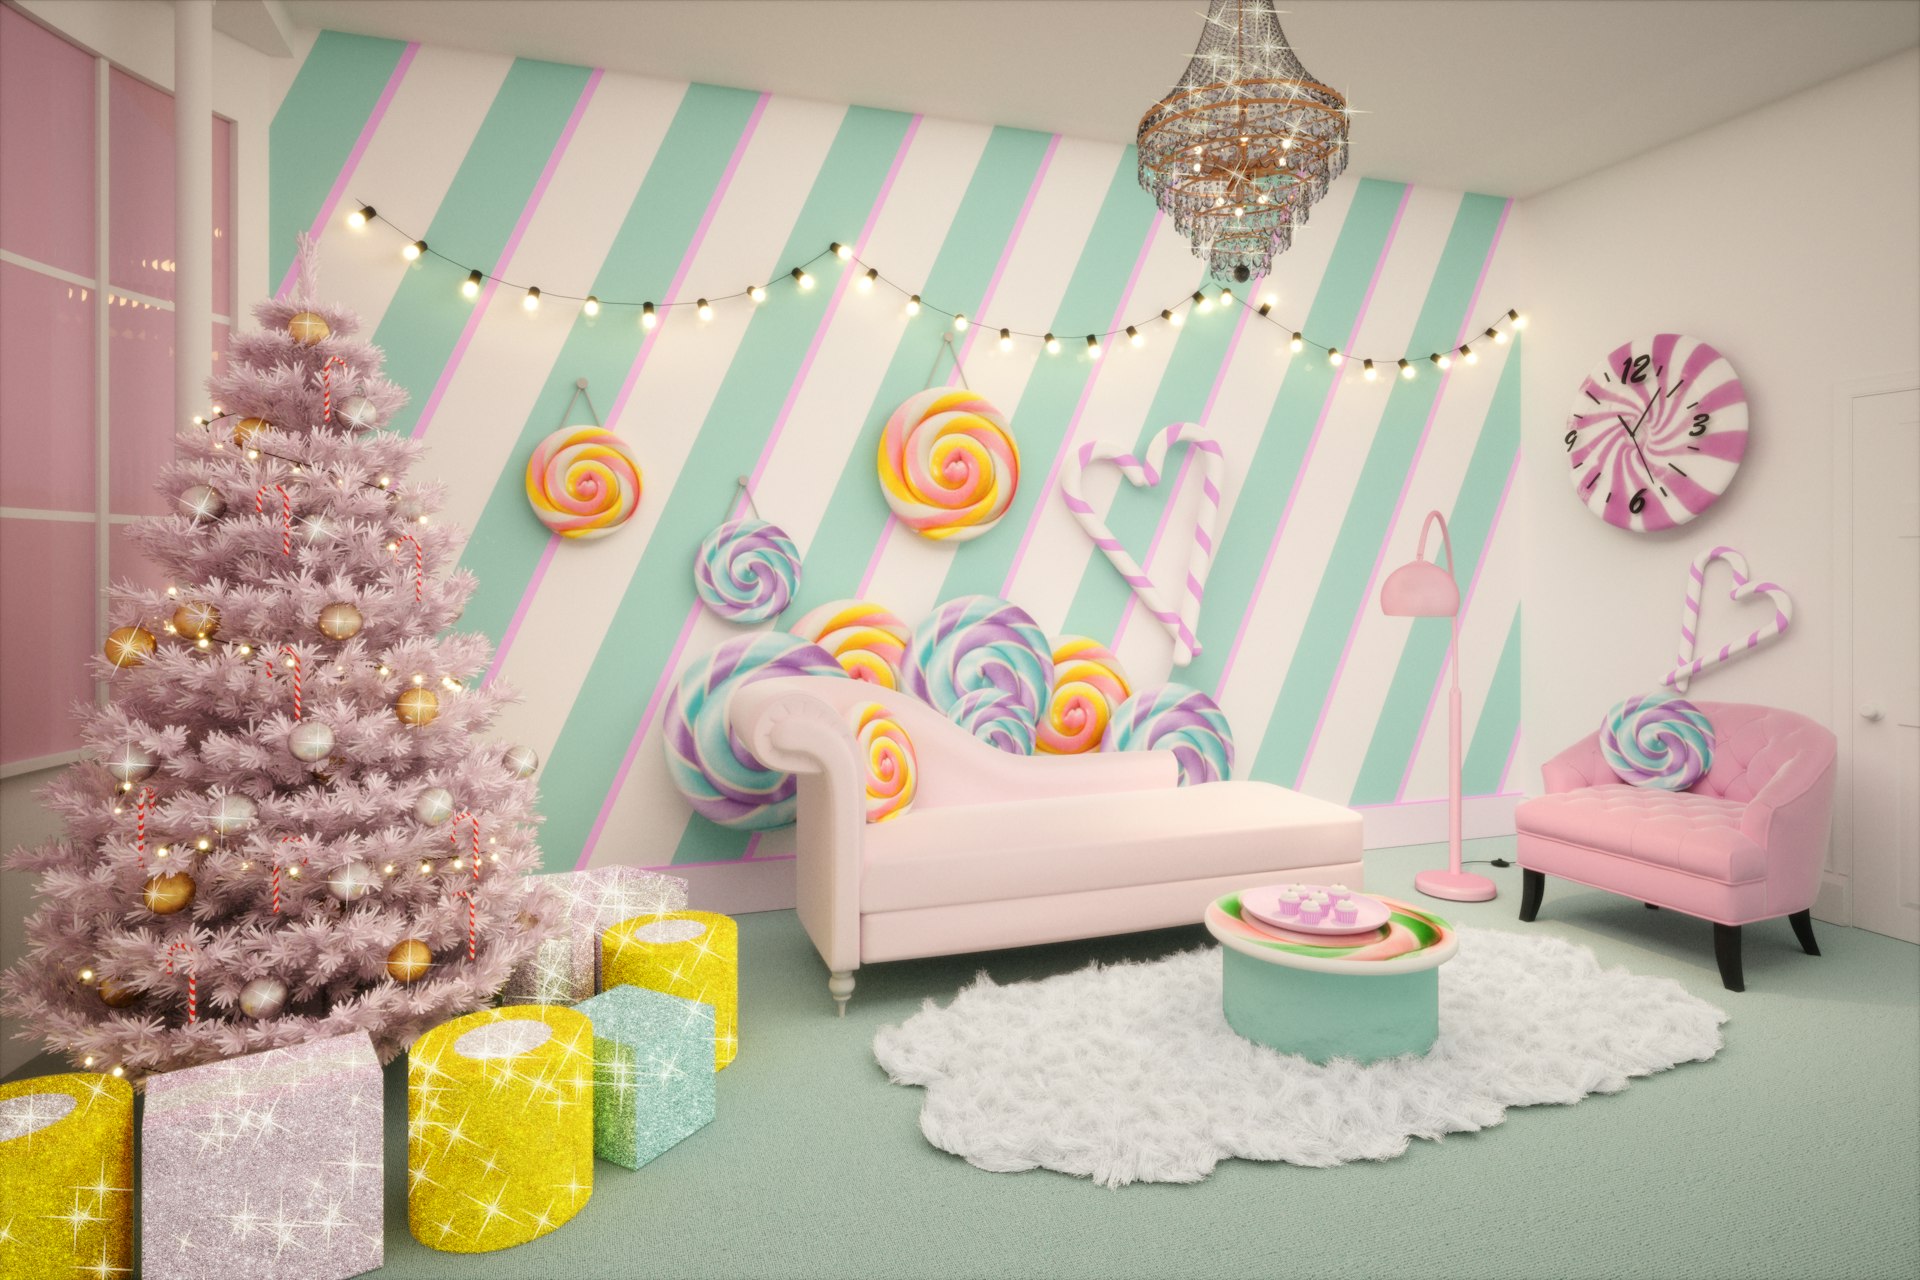 A digital rendering of the Candy Cane House living room decorated in pastel tones